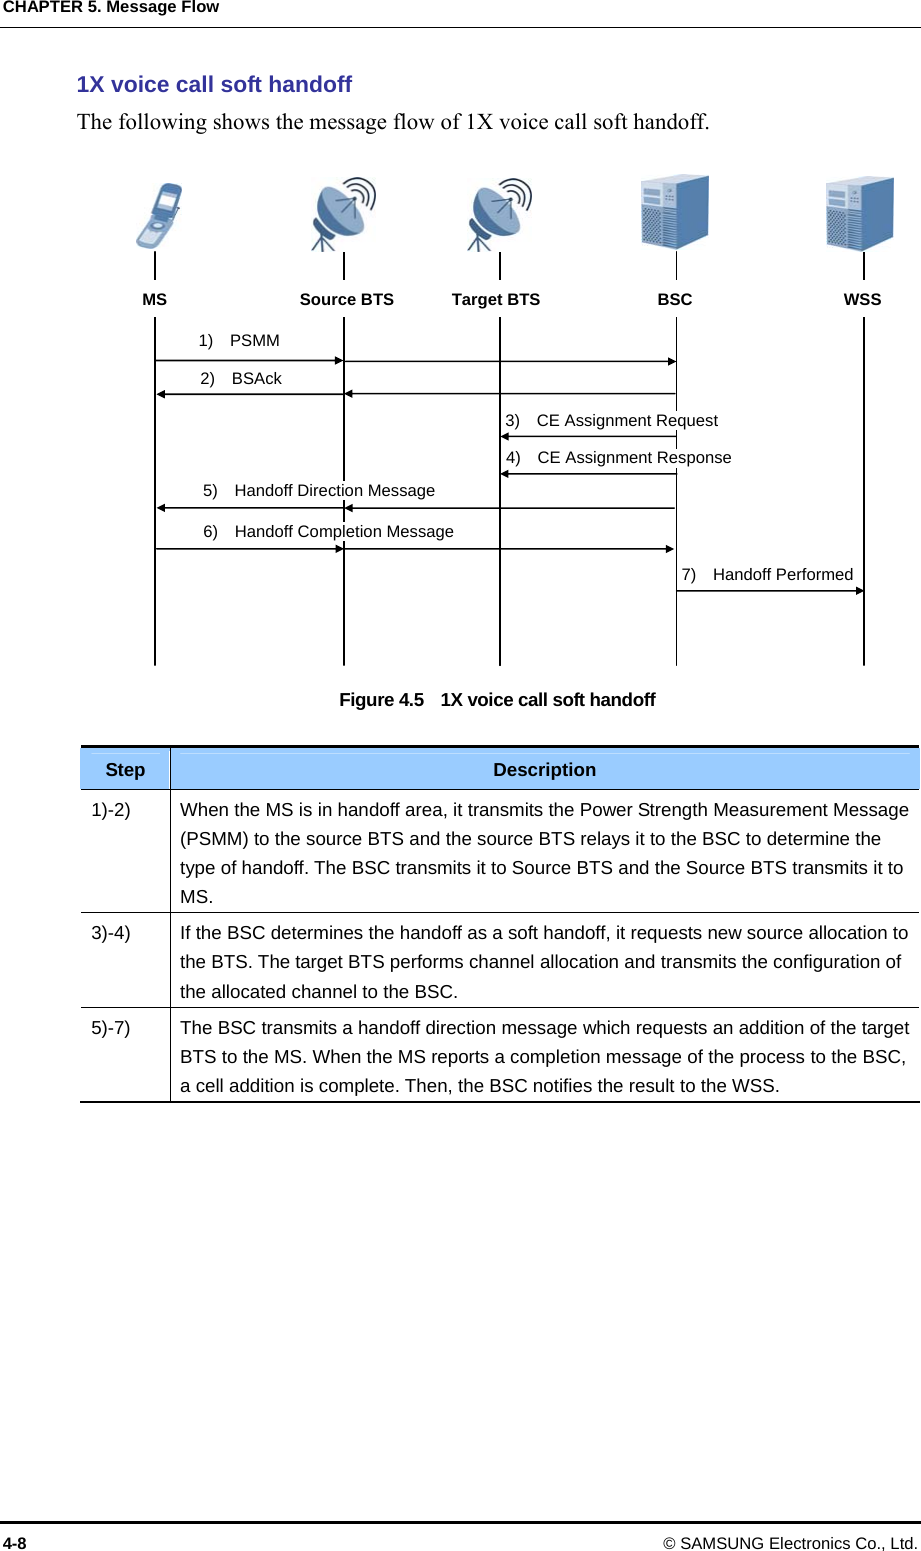 CHAPTER 5. Message Flow 4-8 © SAMSUNG Electronics Co., Ltd. 1X voice call soft handoff The following shows the message flow of 1X voice call soft handoff.  Figure 4.5    1X voice call soft handoff  Step  Description 1)-2)  When the MS is in handoff area, it transmits the Power Strength Measurement Message (PSMM) to the source BTS and the source BTS relays it to the BSC to determine the type of handoff. The BSC transmits it to Source BTS and the Source BTS transmits it to MS. 3)-4)  If the BSC determines the handoff as a soft handoff, it requests new source allocation to the BTS. The target BTS performs channel allocation and transmits the configuration of the allocated channel to the BSC. 5)-7)  The BSC transmits a handoff direction message which requests an addition of the target BTS to the MS. When the MS reports a completion message of the process to the BSC, a cell addition is complete. Then, the BSC notifies the result to the WSS.  MS  Source BTS  BSC  WSS 3)  CE Assignment Request 7)  Handoff Performed 1)  PSMM Target BTS 2)  BSAck 4)  CE Assignment Response 5)  Handoff Direction Message 6)  Handoff Completion Message 